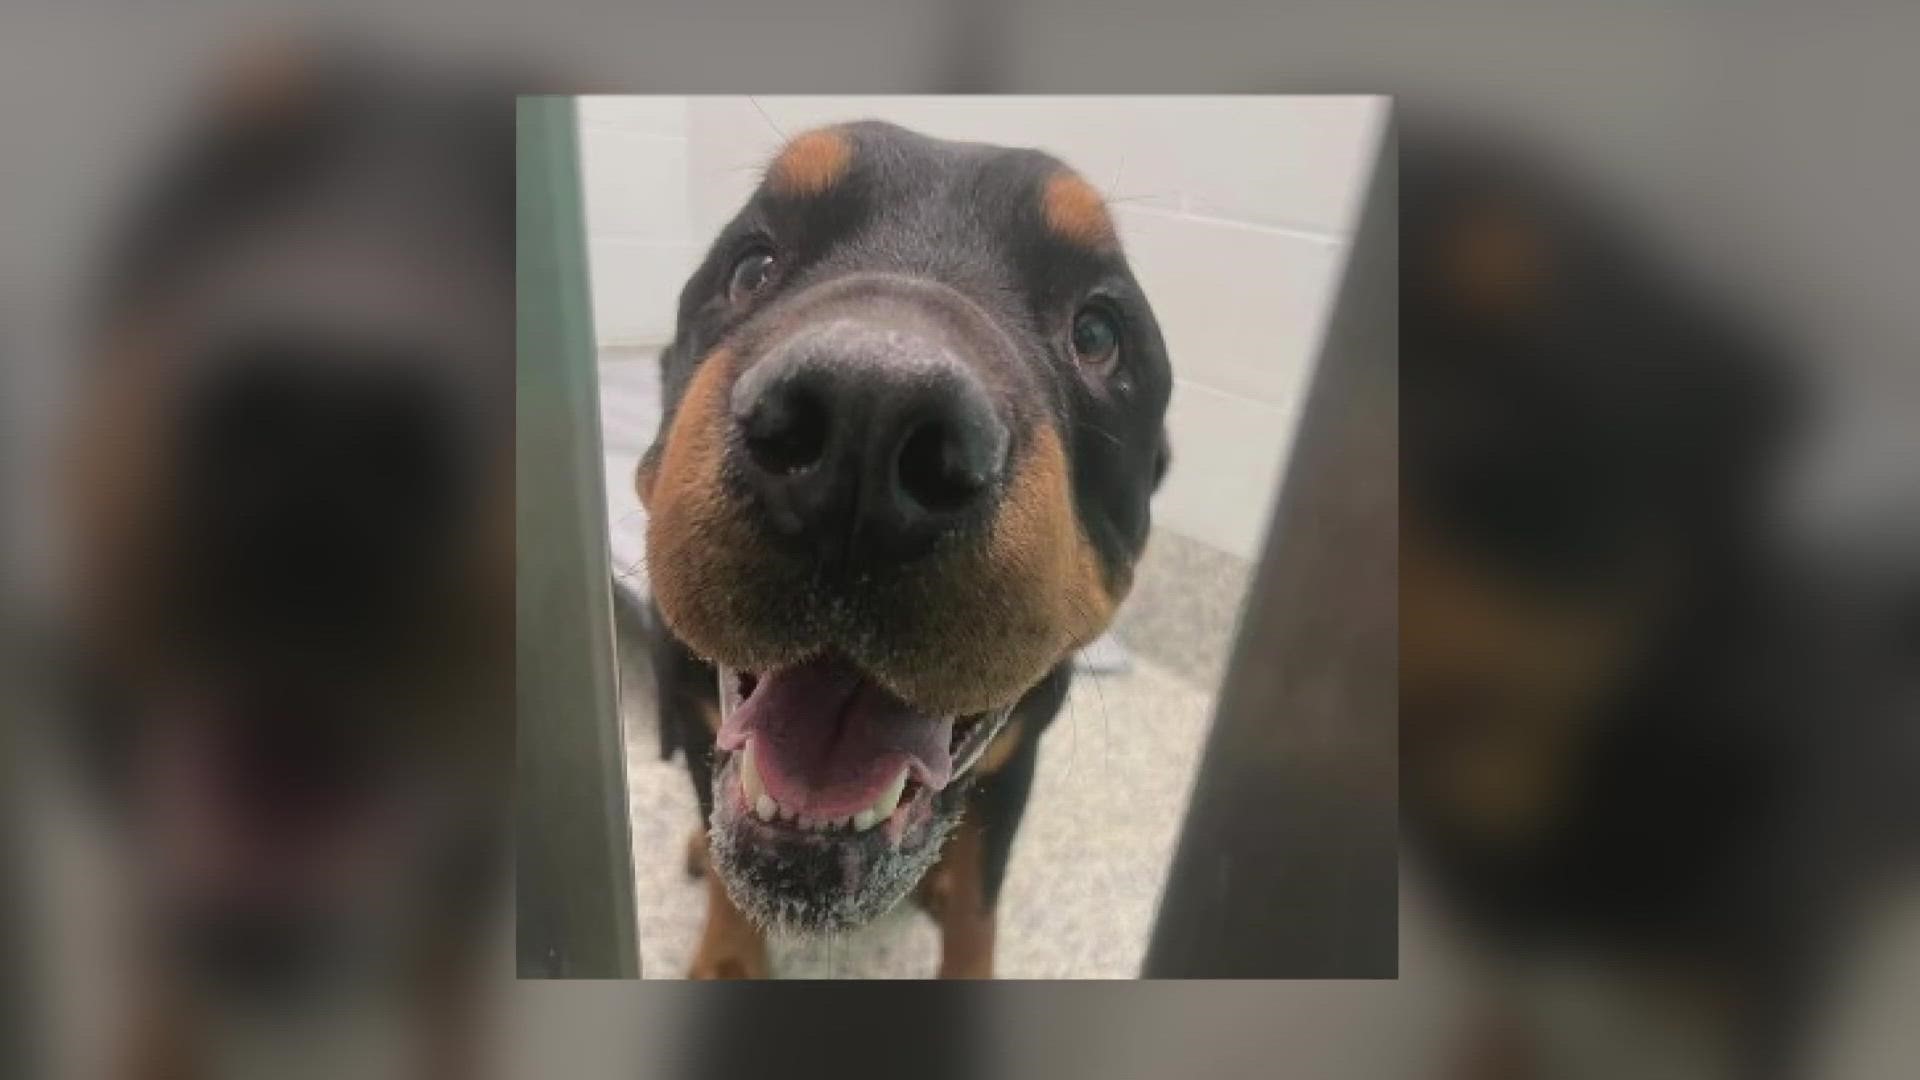 A dog named Bear went missing from his yard in Texas three years ago. His journey after that brought him to Colorado and a new family.